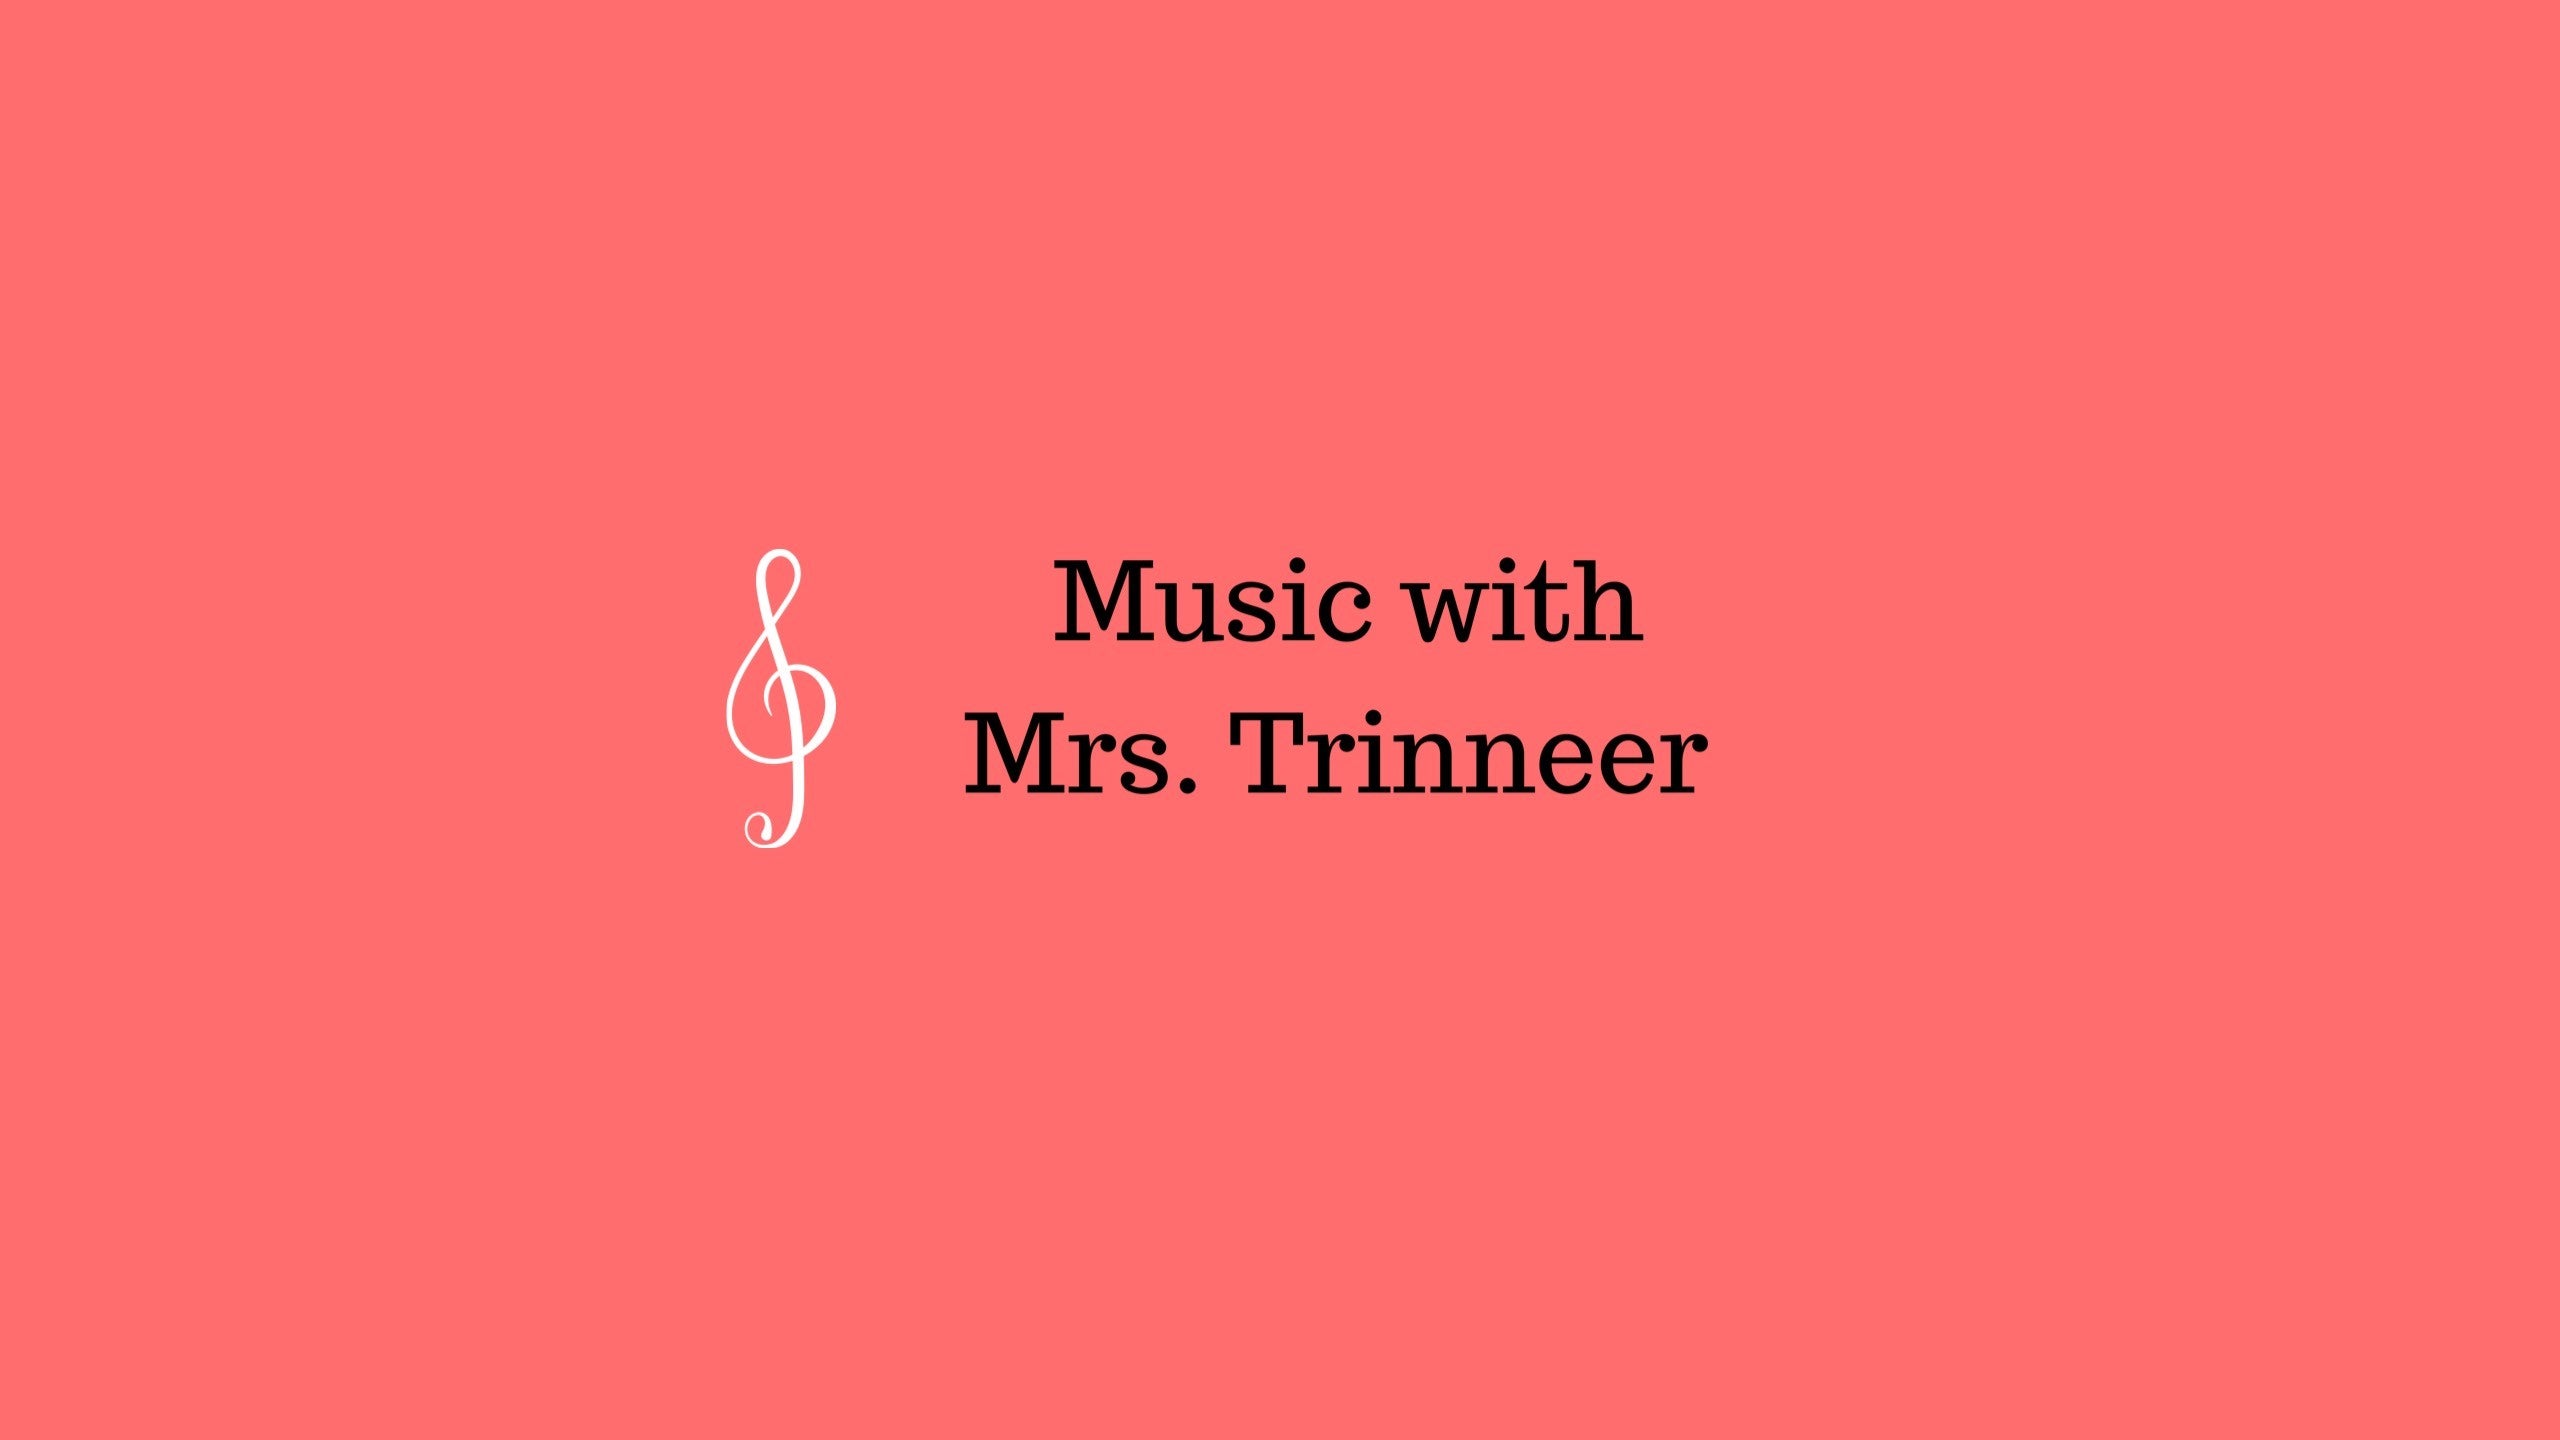 Music with Mrs. Trinneer